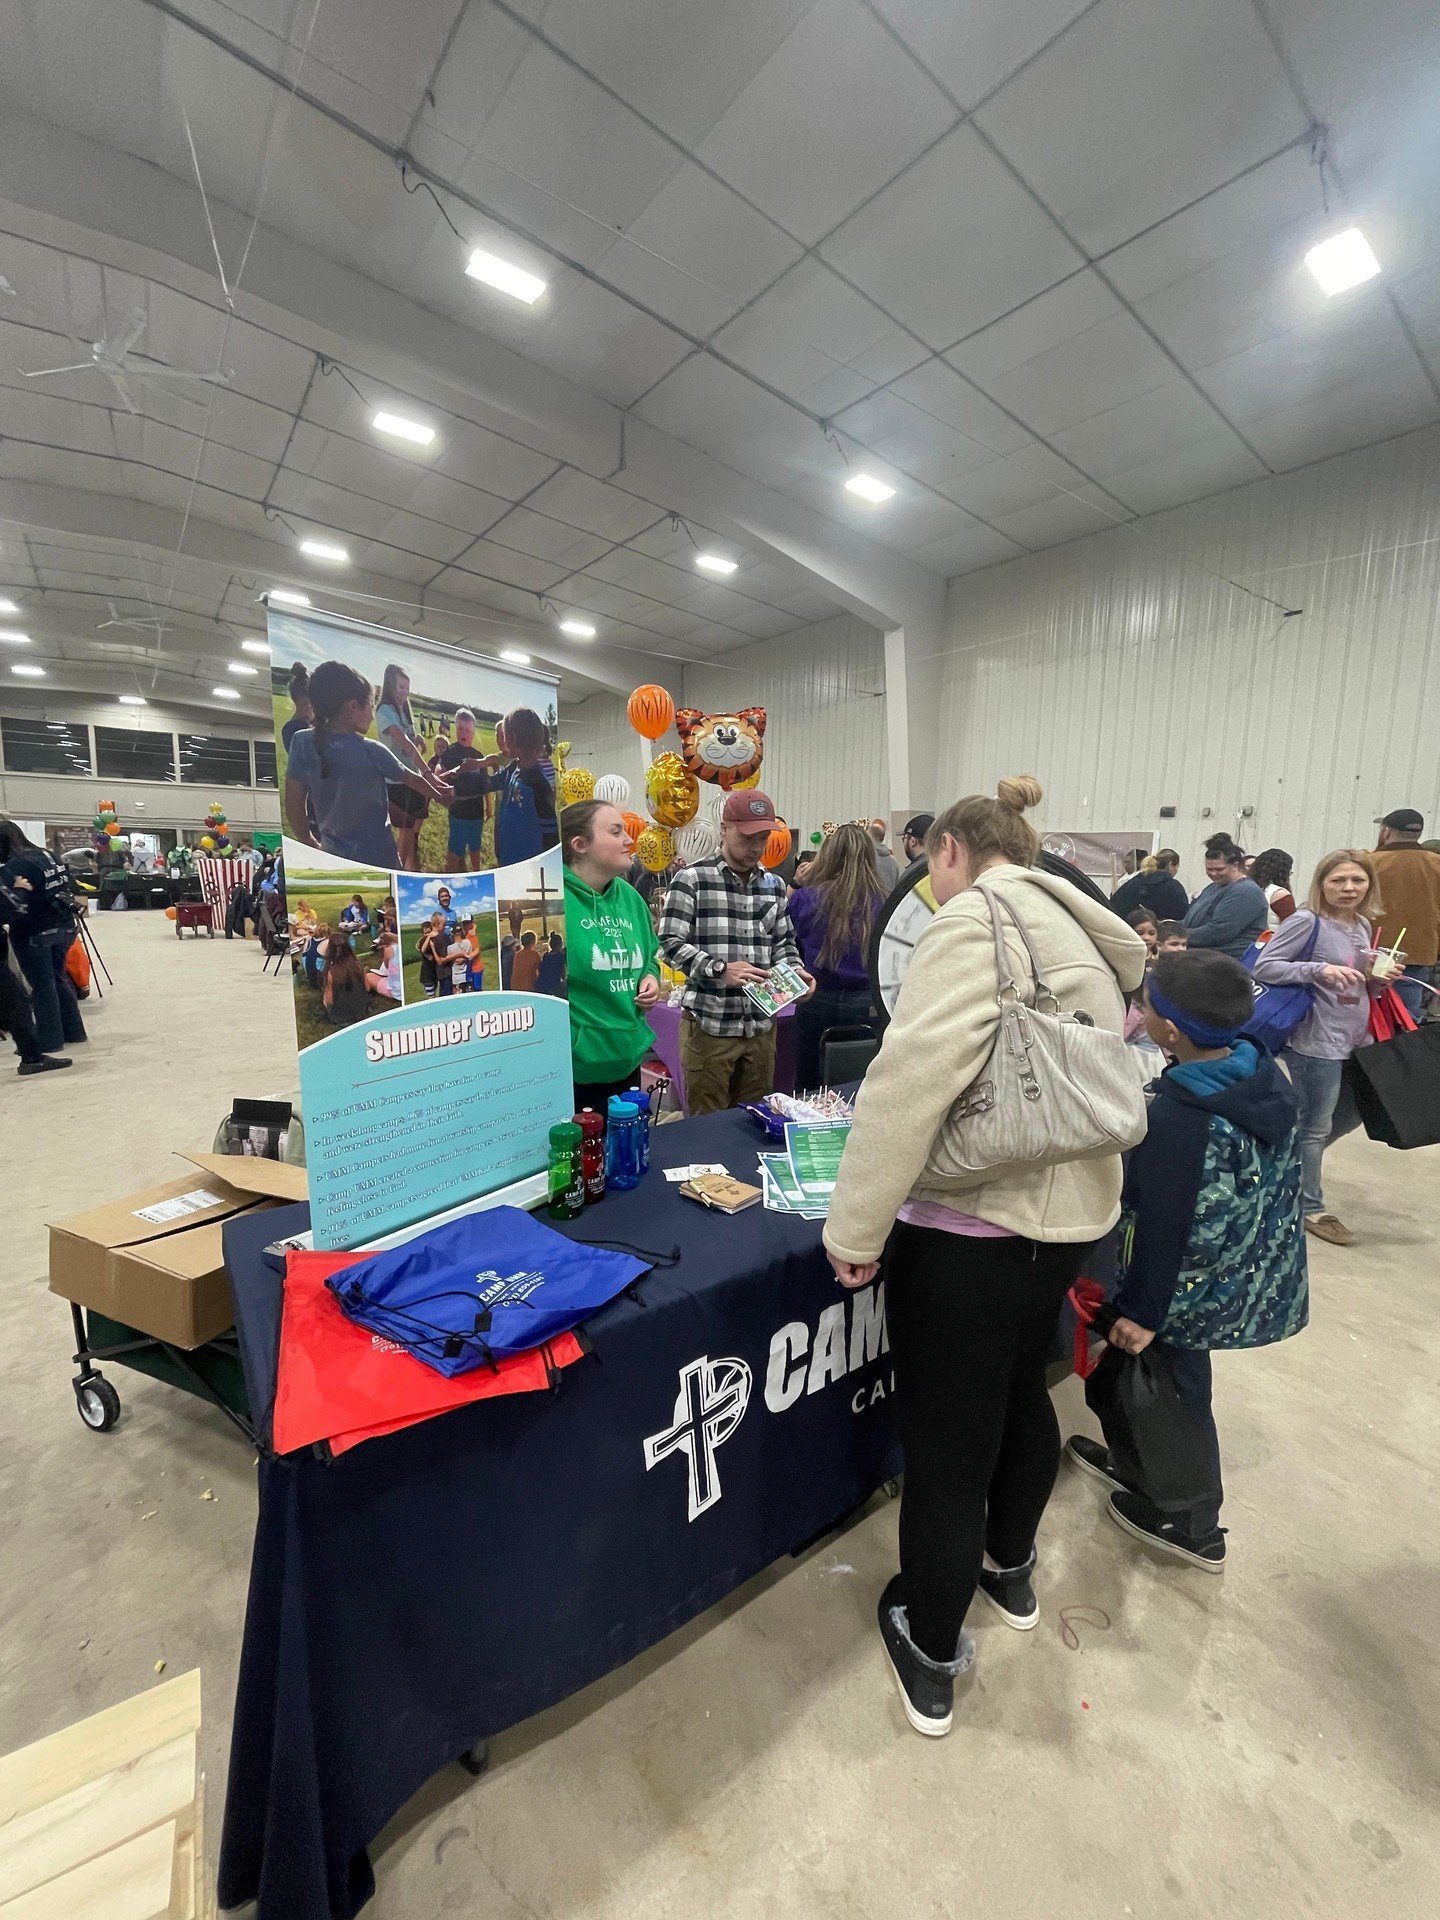 Last Friday at Kids' Day Out was great as we spent time with the children, sharing information about summer camp! A big thank you to everyone who visited our booth, spinning the prize wheel and discovering more about Springbrook Bible Camp!🍬⛺